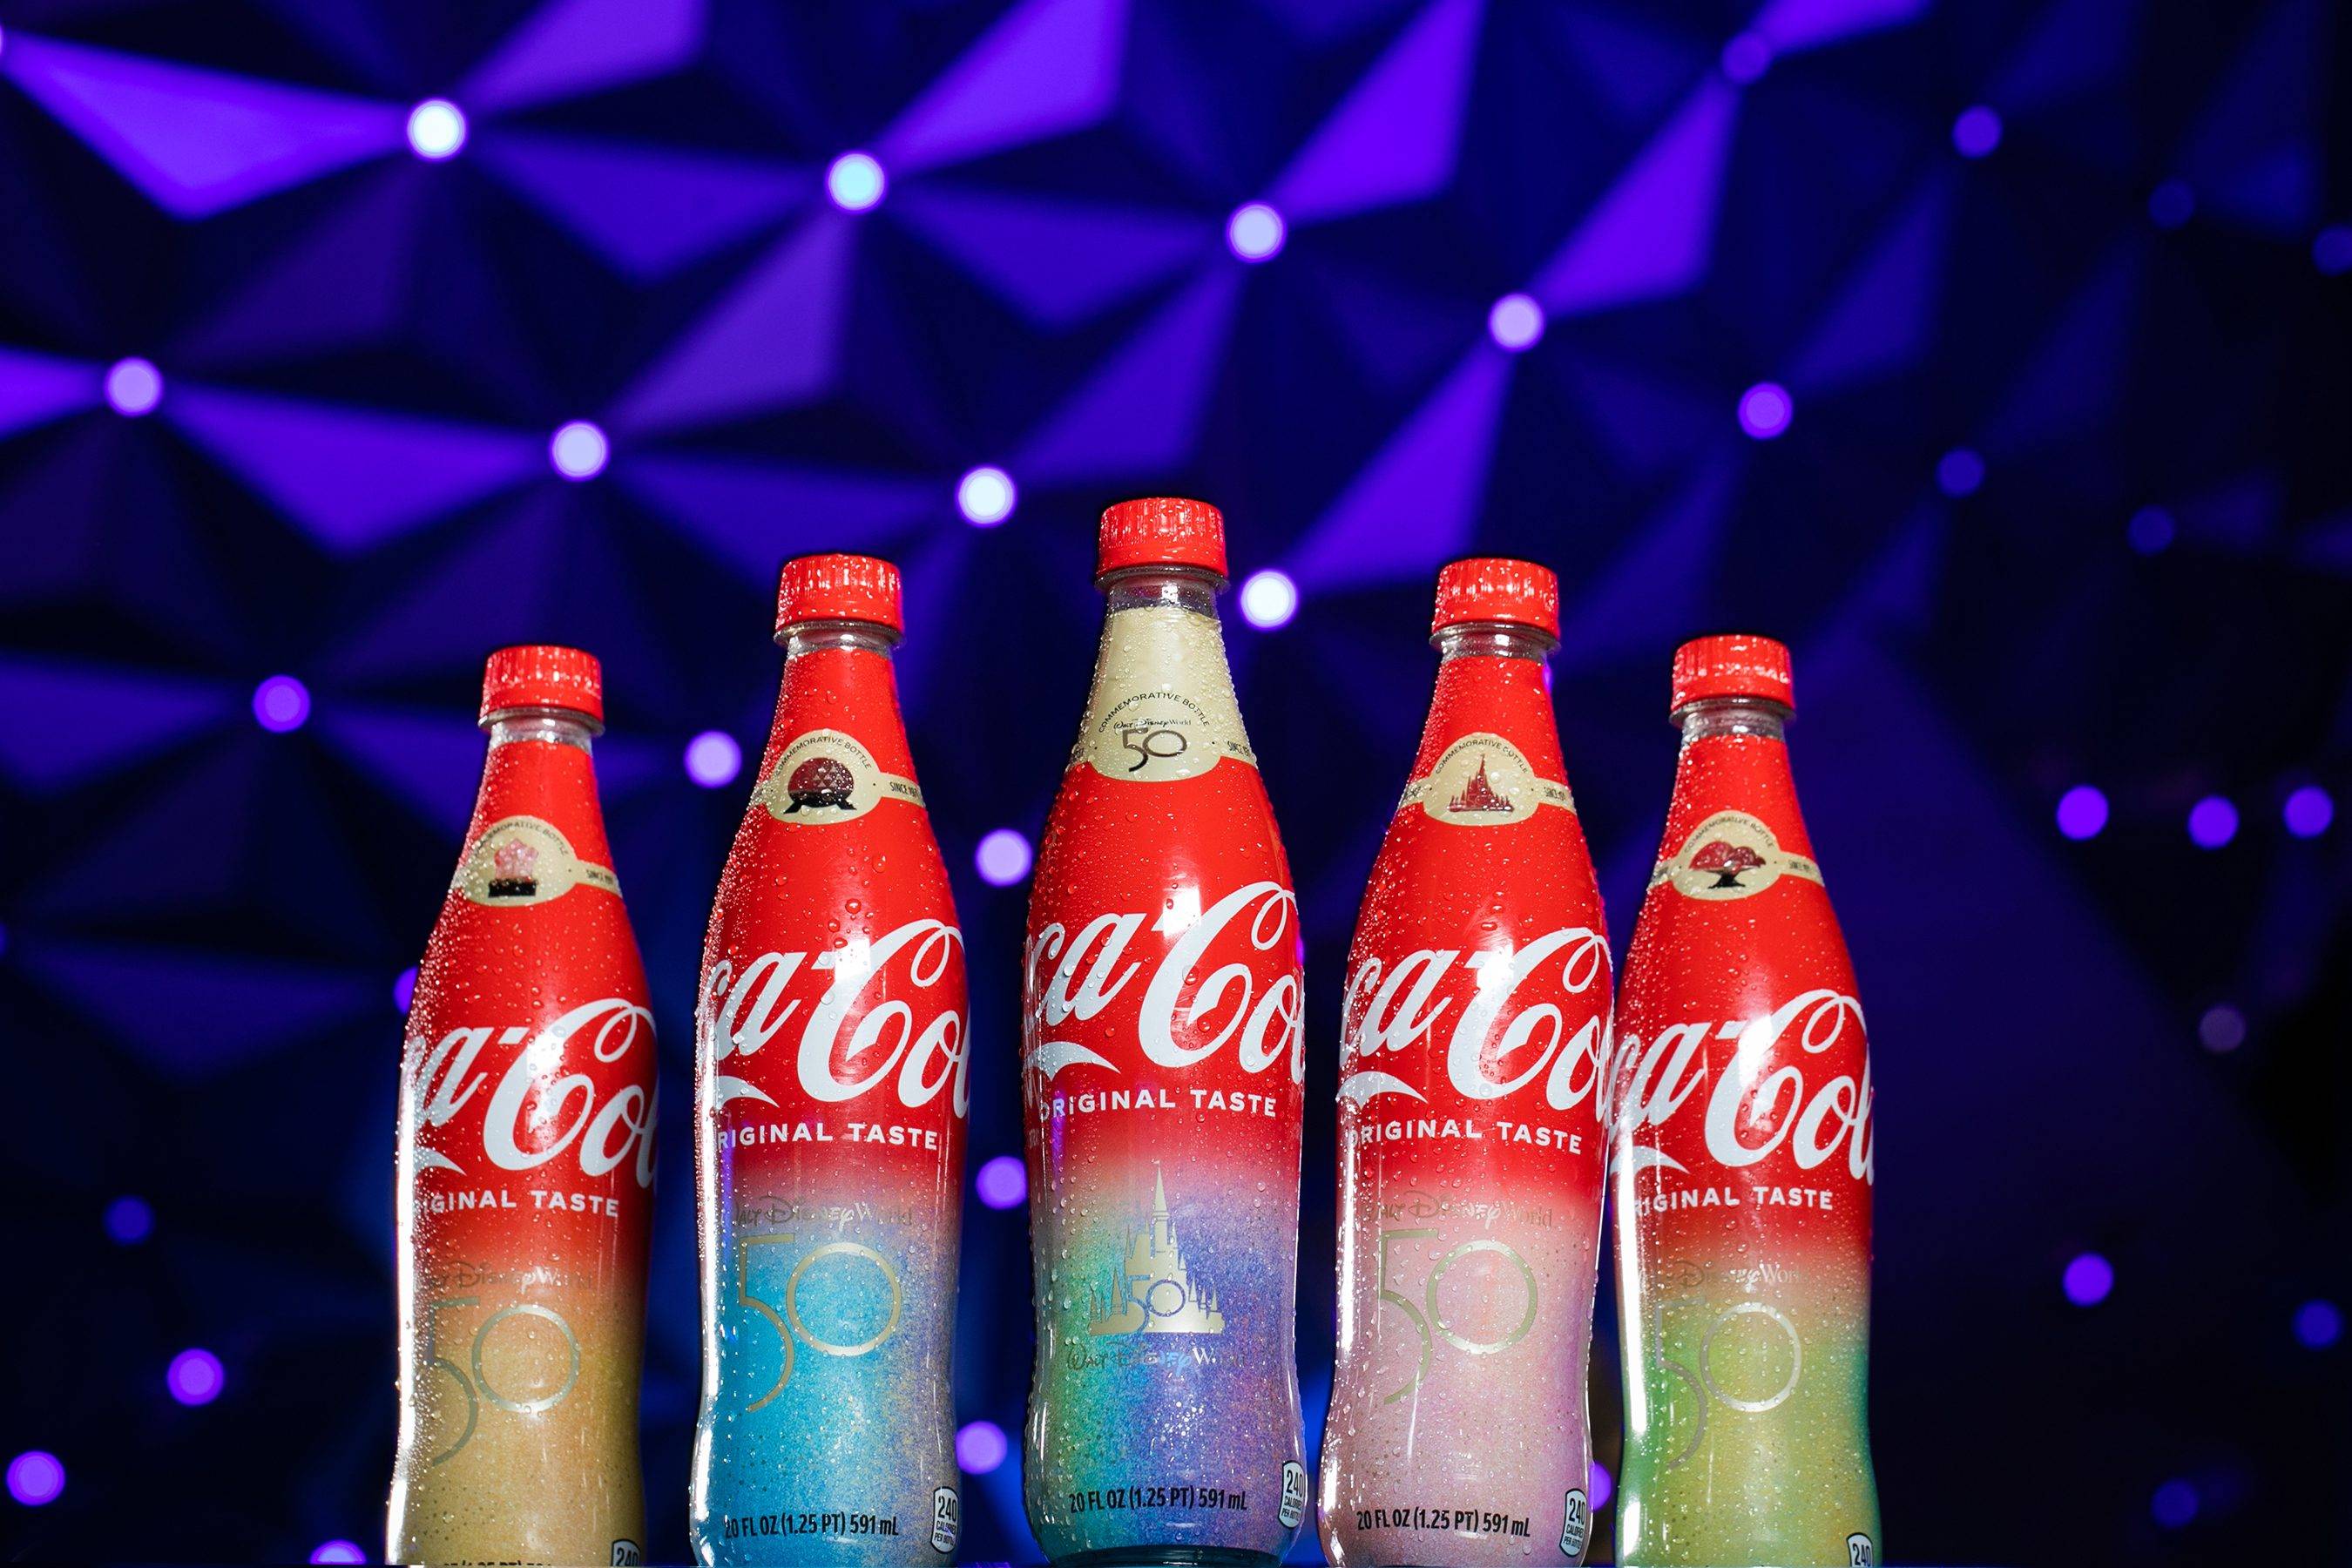 Walt Disney World Resort and Coca-Cola collectible bottles now available exclusively at the resort during the 50th Anniversary Celebration